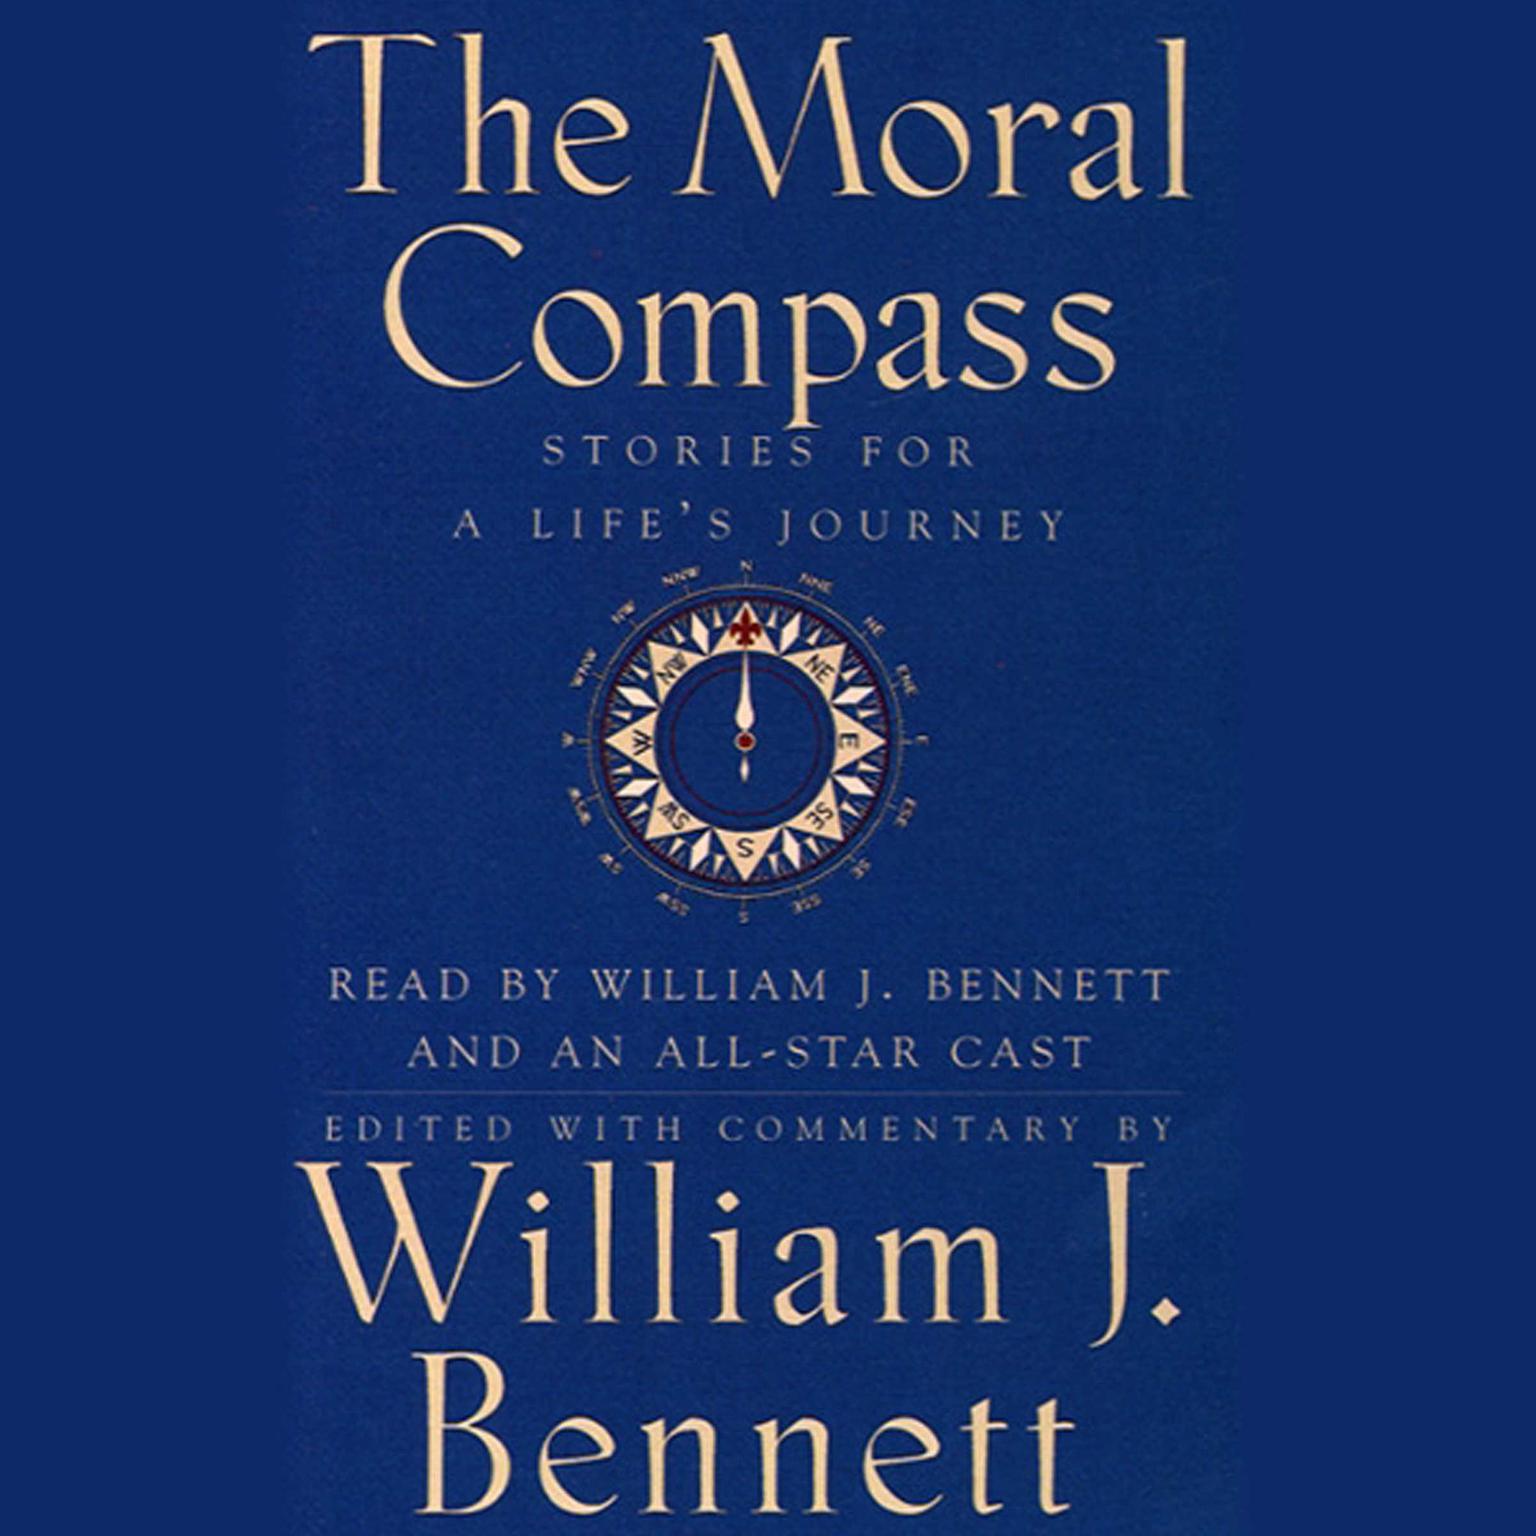 The Moral Compass (Abridged): Volume One of An Audio Library of Stories for a Lifes Journey Audiobook, by William J. Bennett